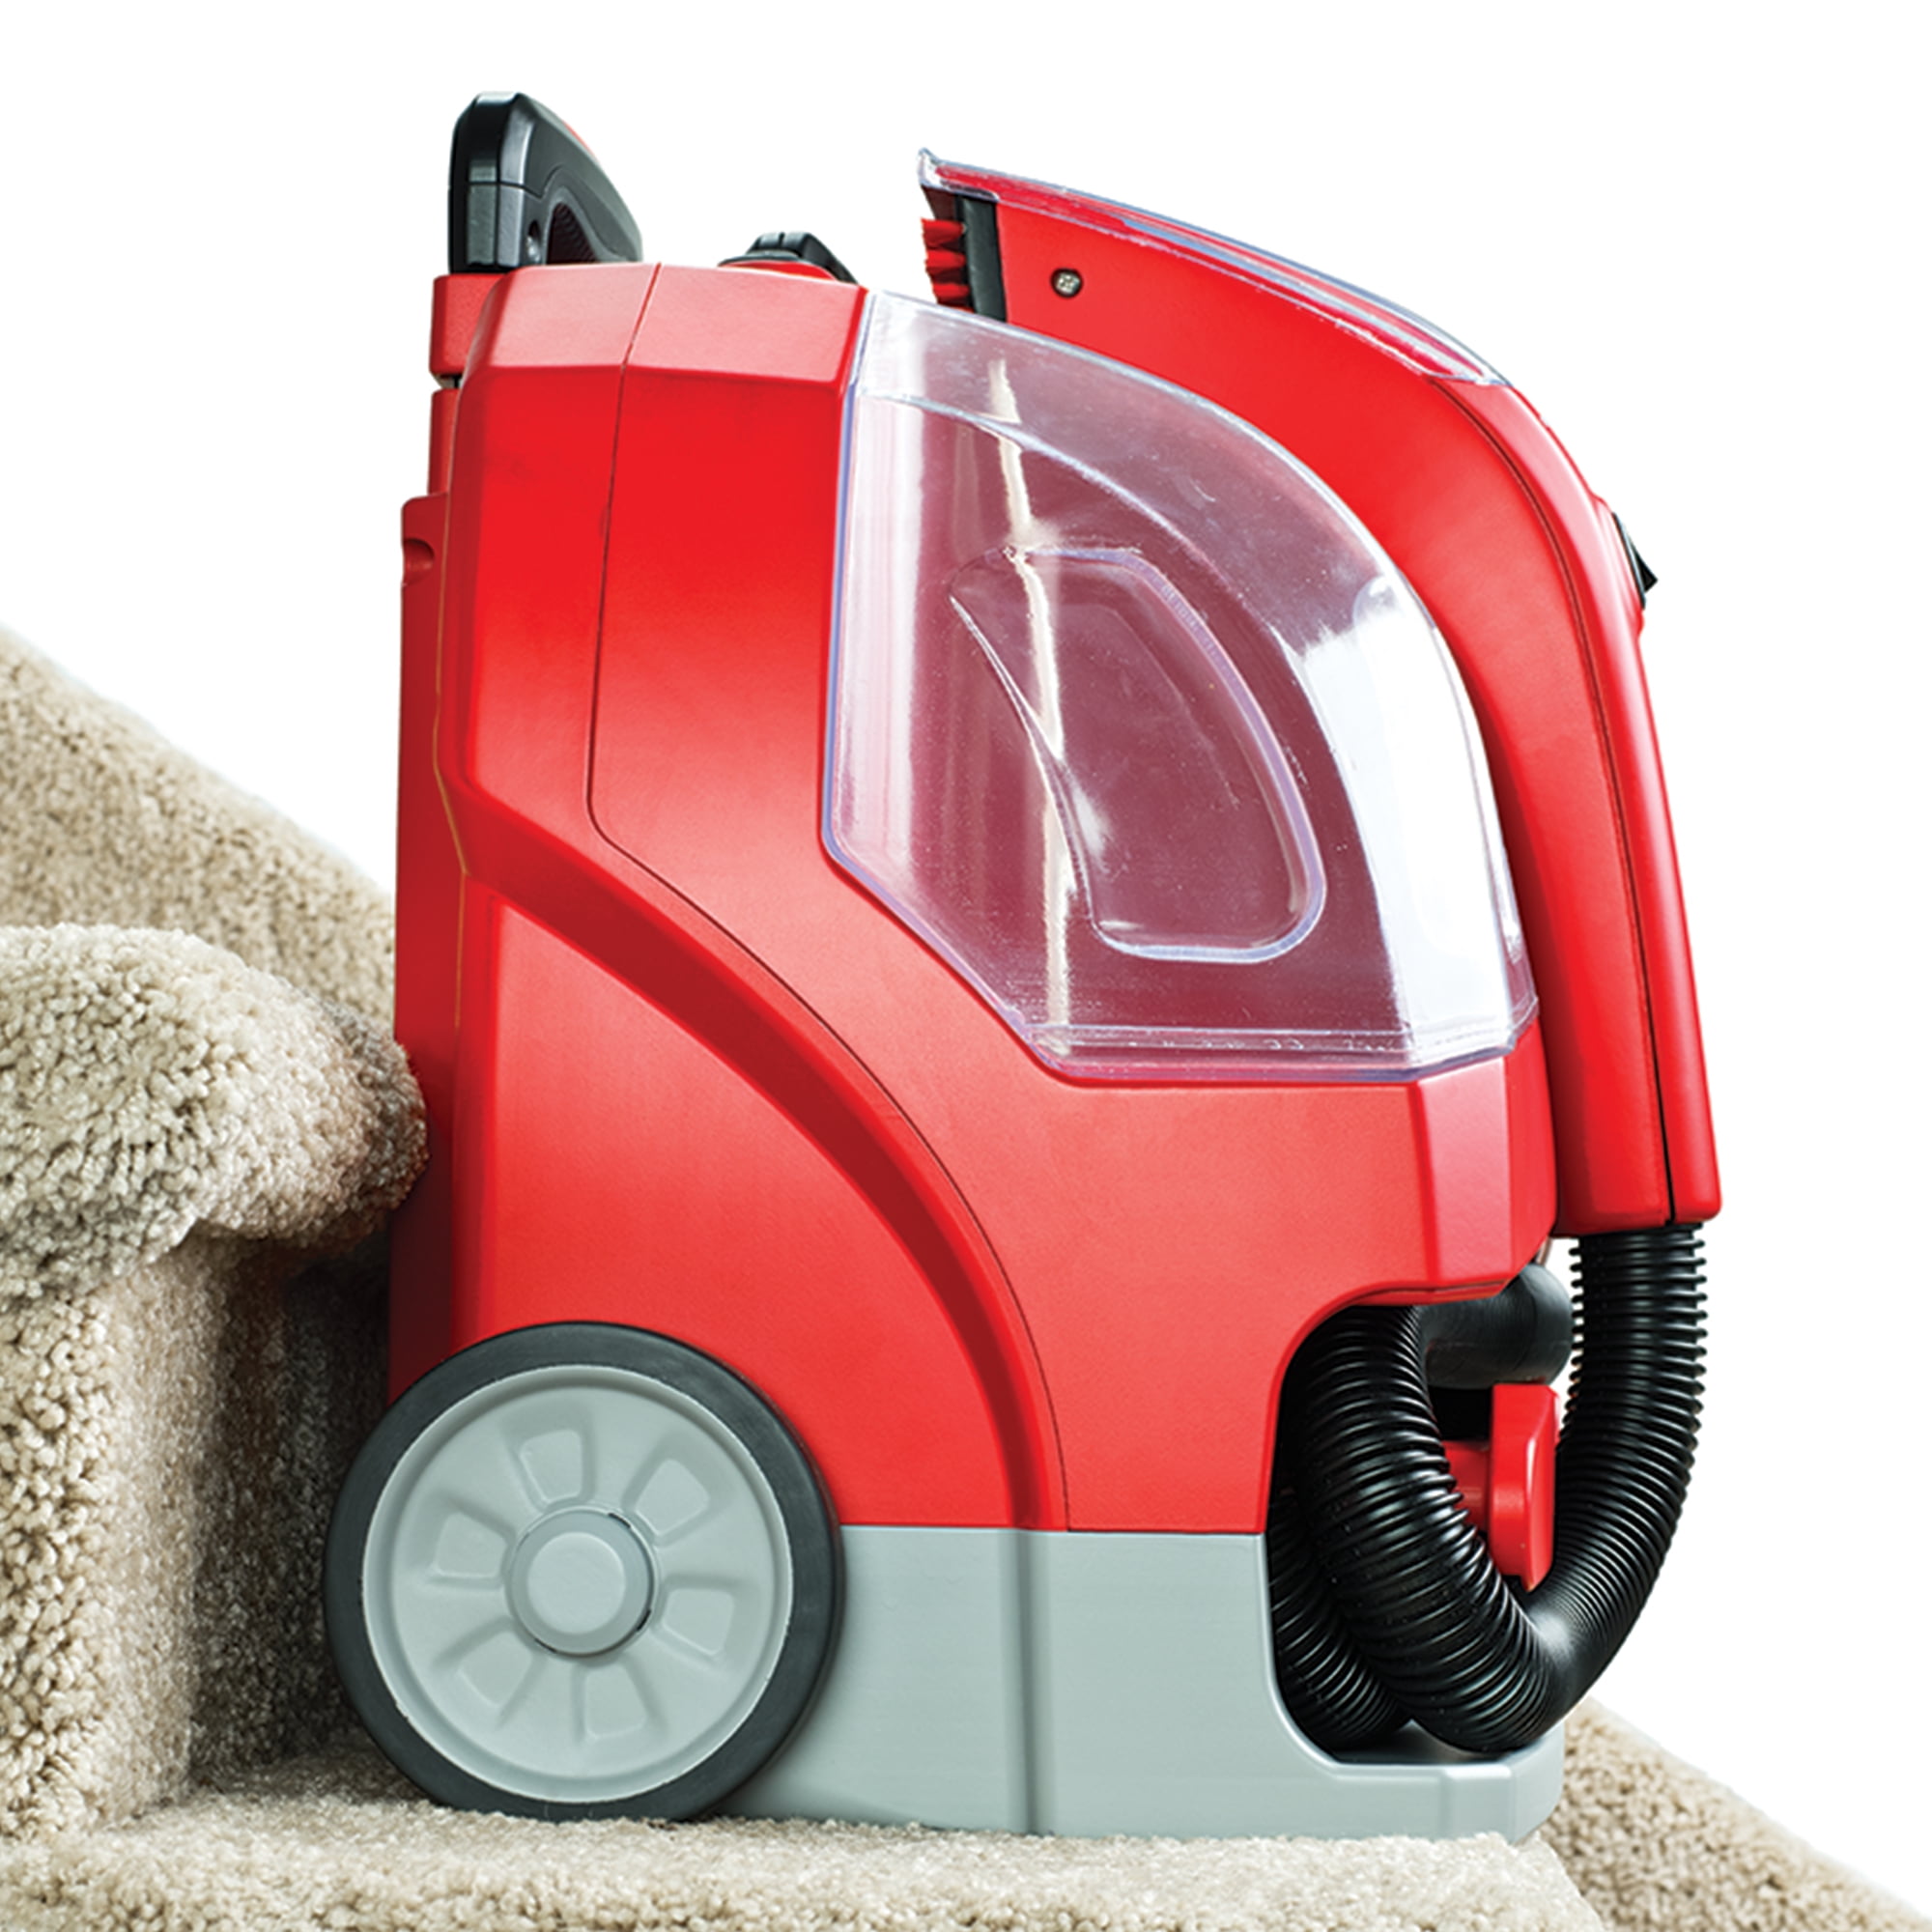 Rug Doctor Portable Spot Cleaner Removes Stains And Neutralizes Odors Leading Machine Cleans Carpet Rugs Upholstery Com